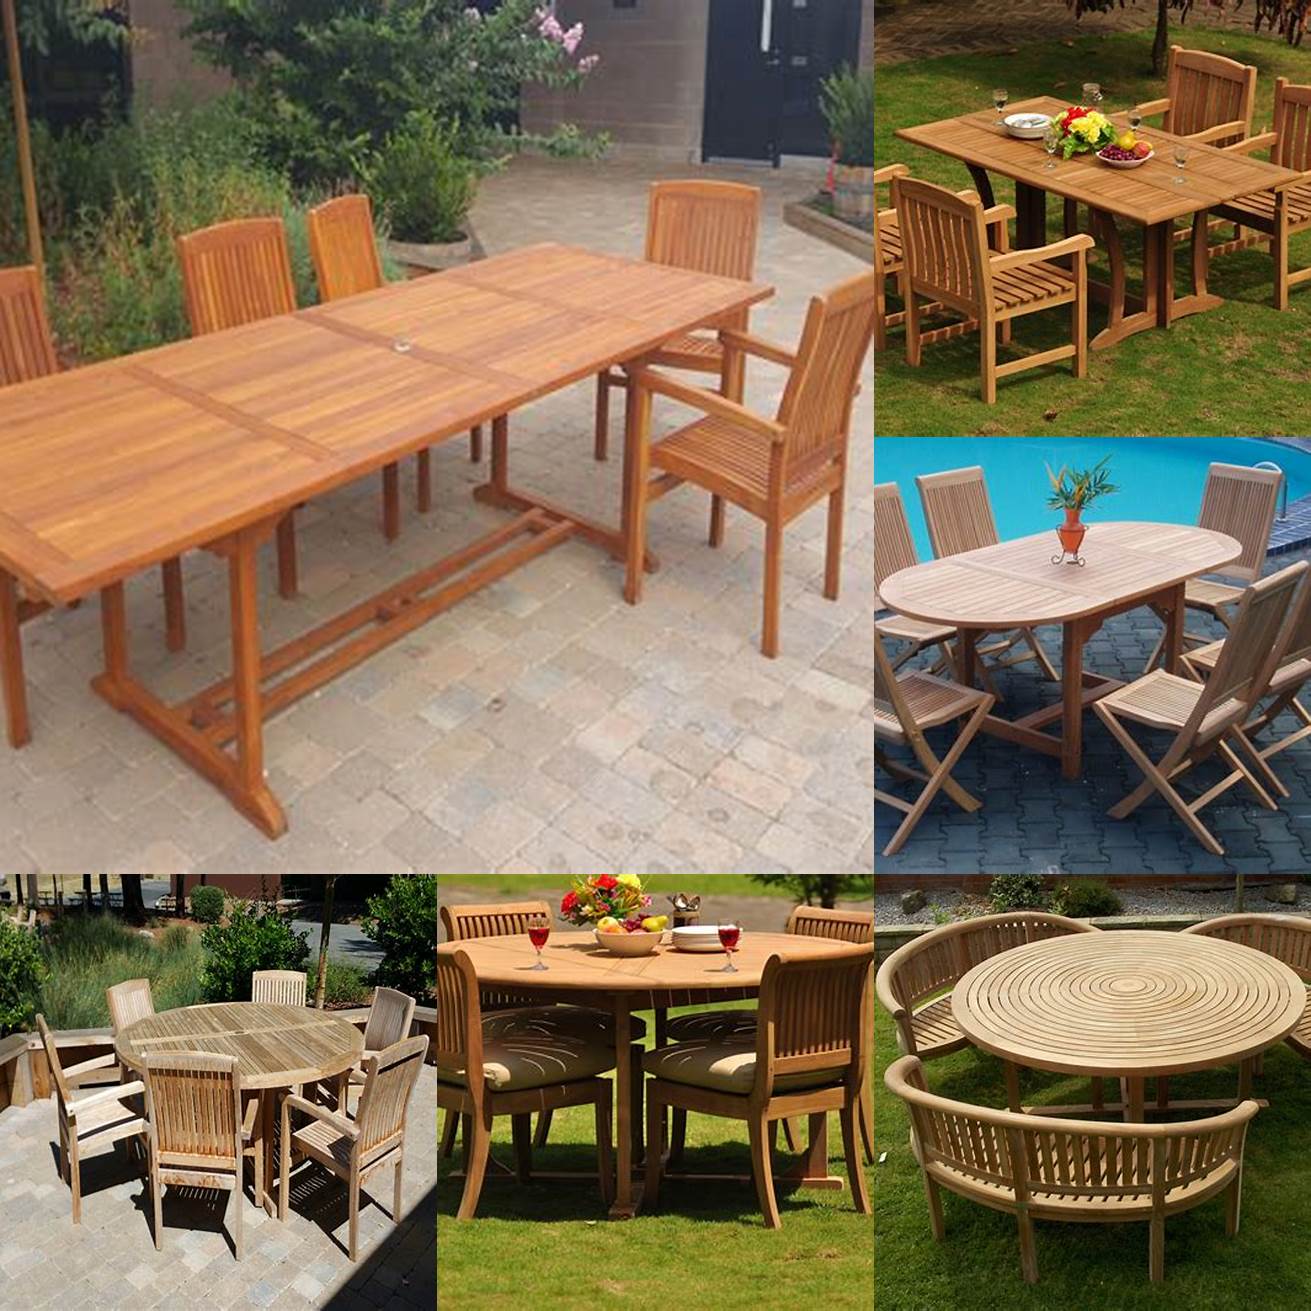 Teak furniture from different angles